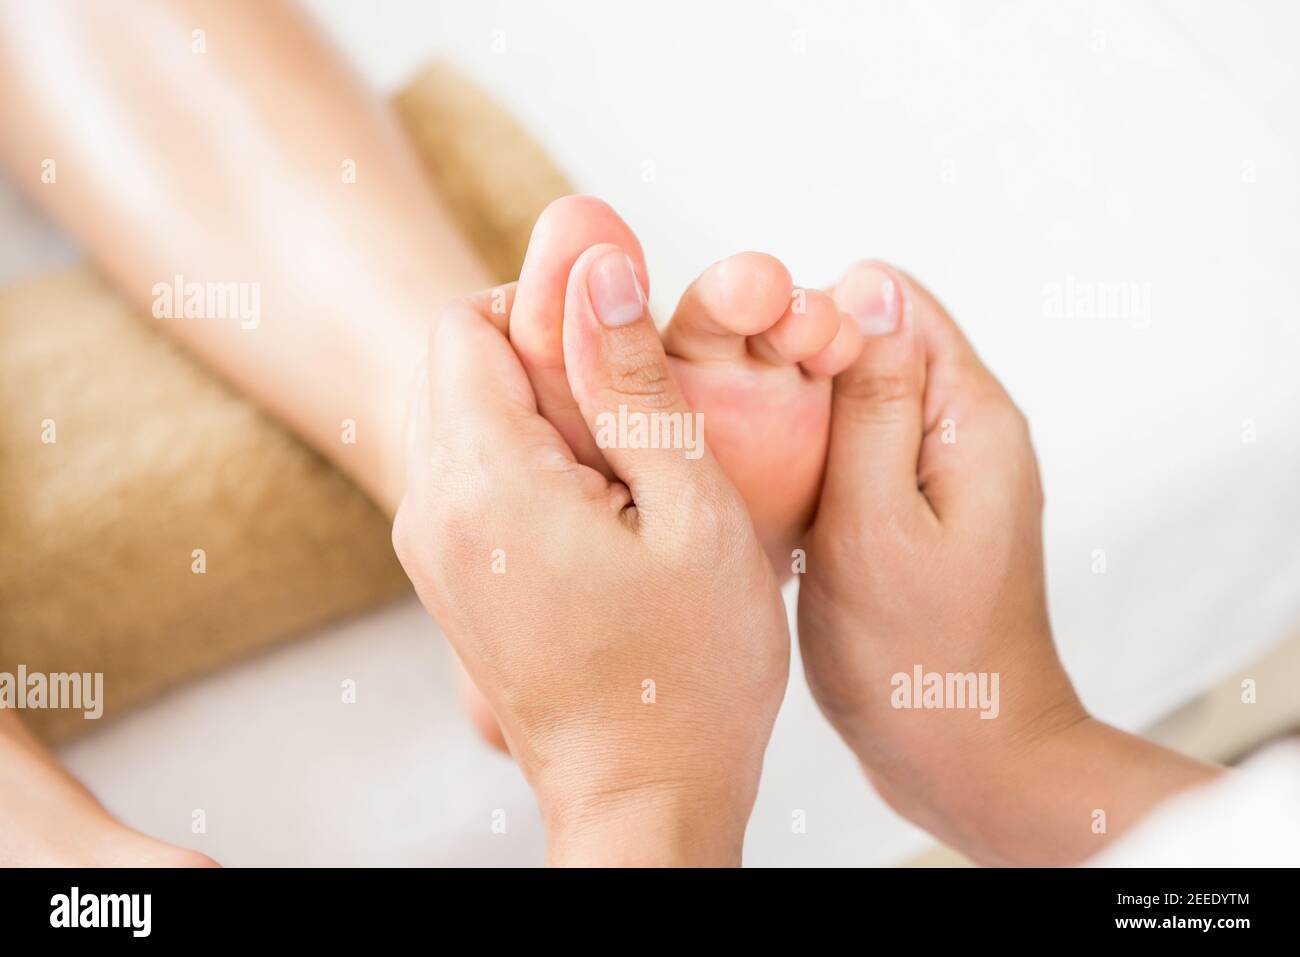 Professional therapist giving relaxing reflexology Thai foot massage to a woman in spa Stock Photo